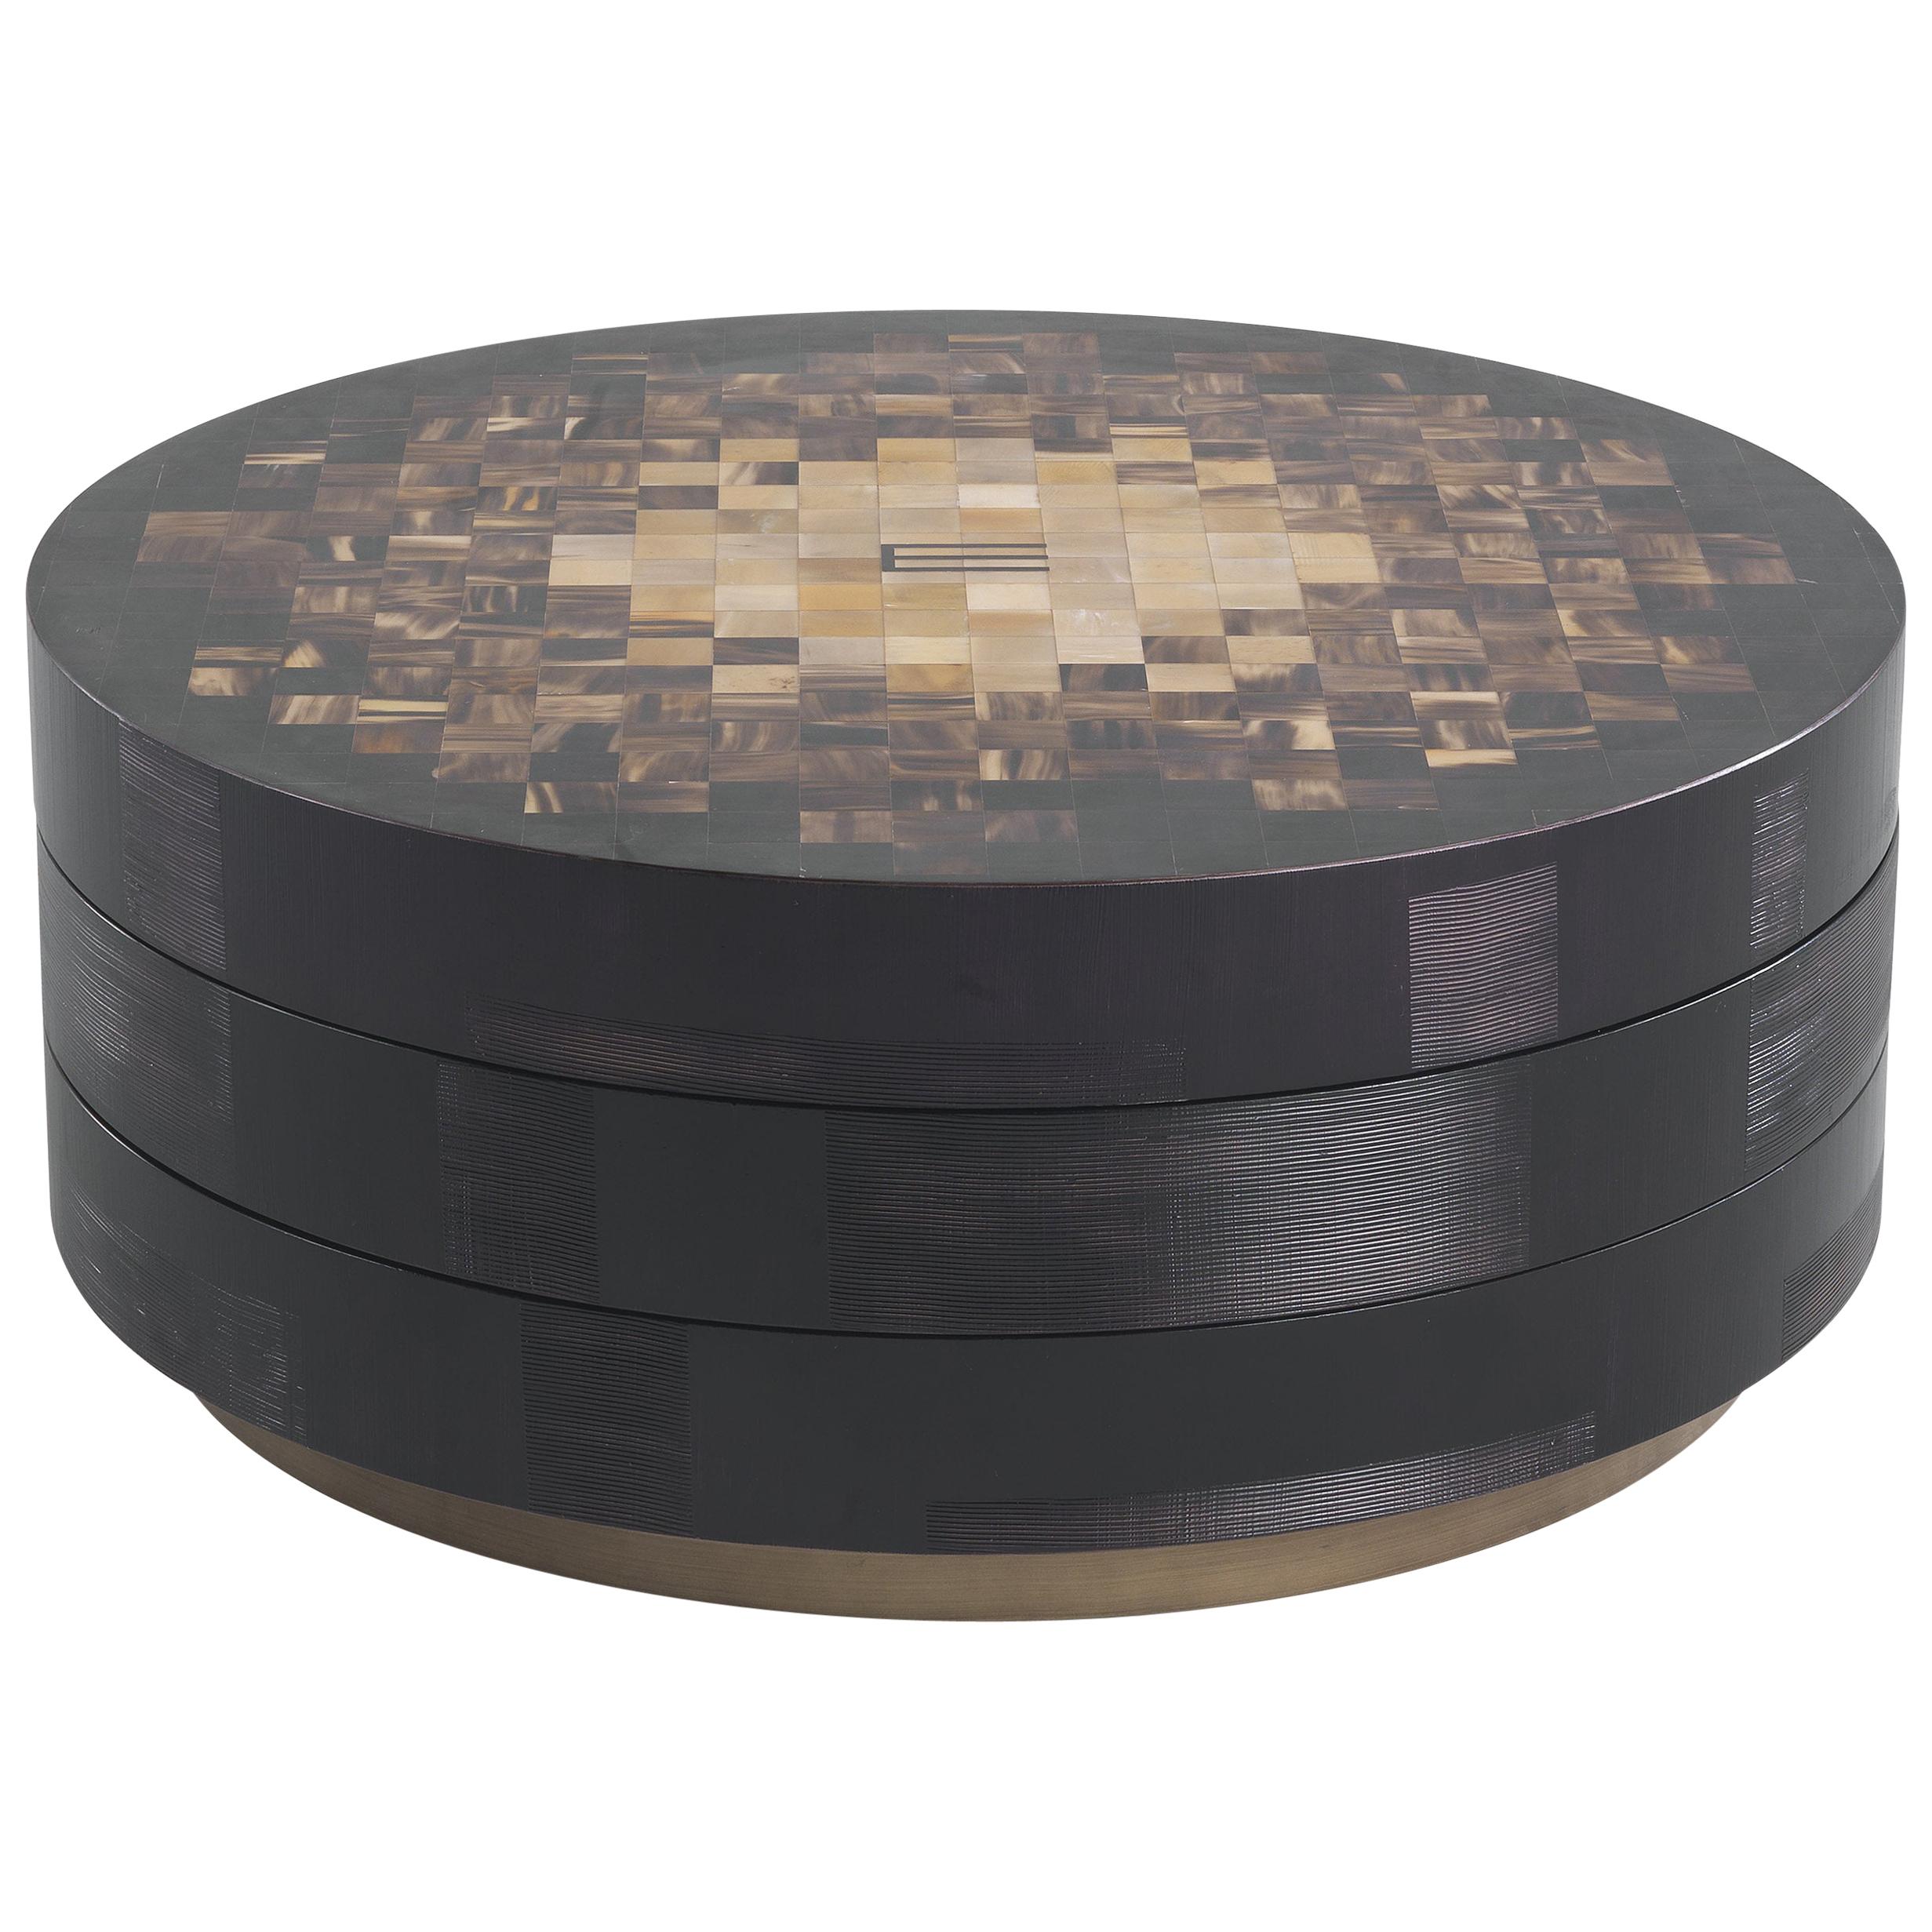 21st Century Aleppo Central Table with Ox Horn Inlay by Etro Home Interiors